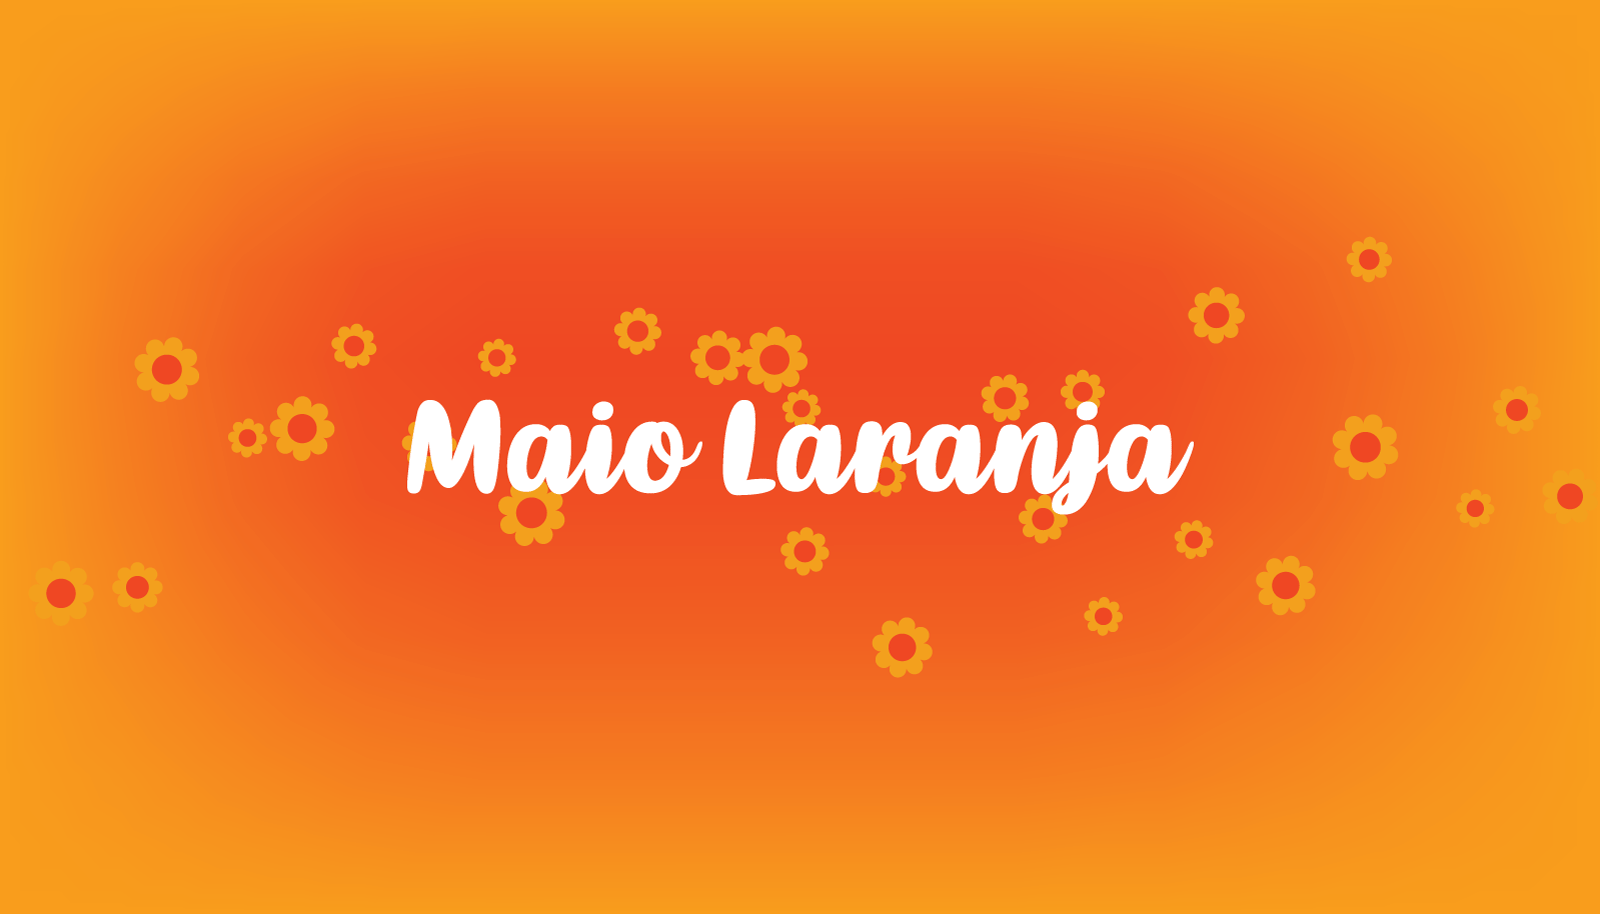 Maio laranja campaign against violence research of children 18 may design Logo Template